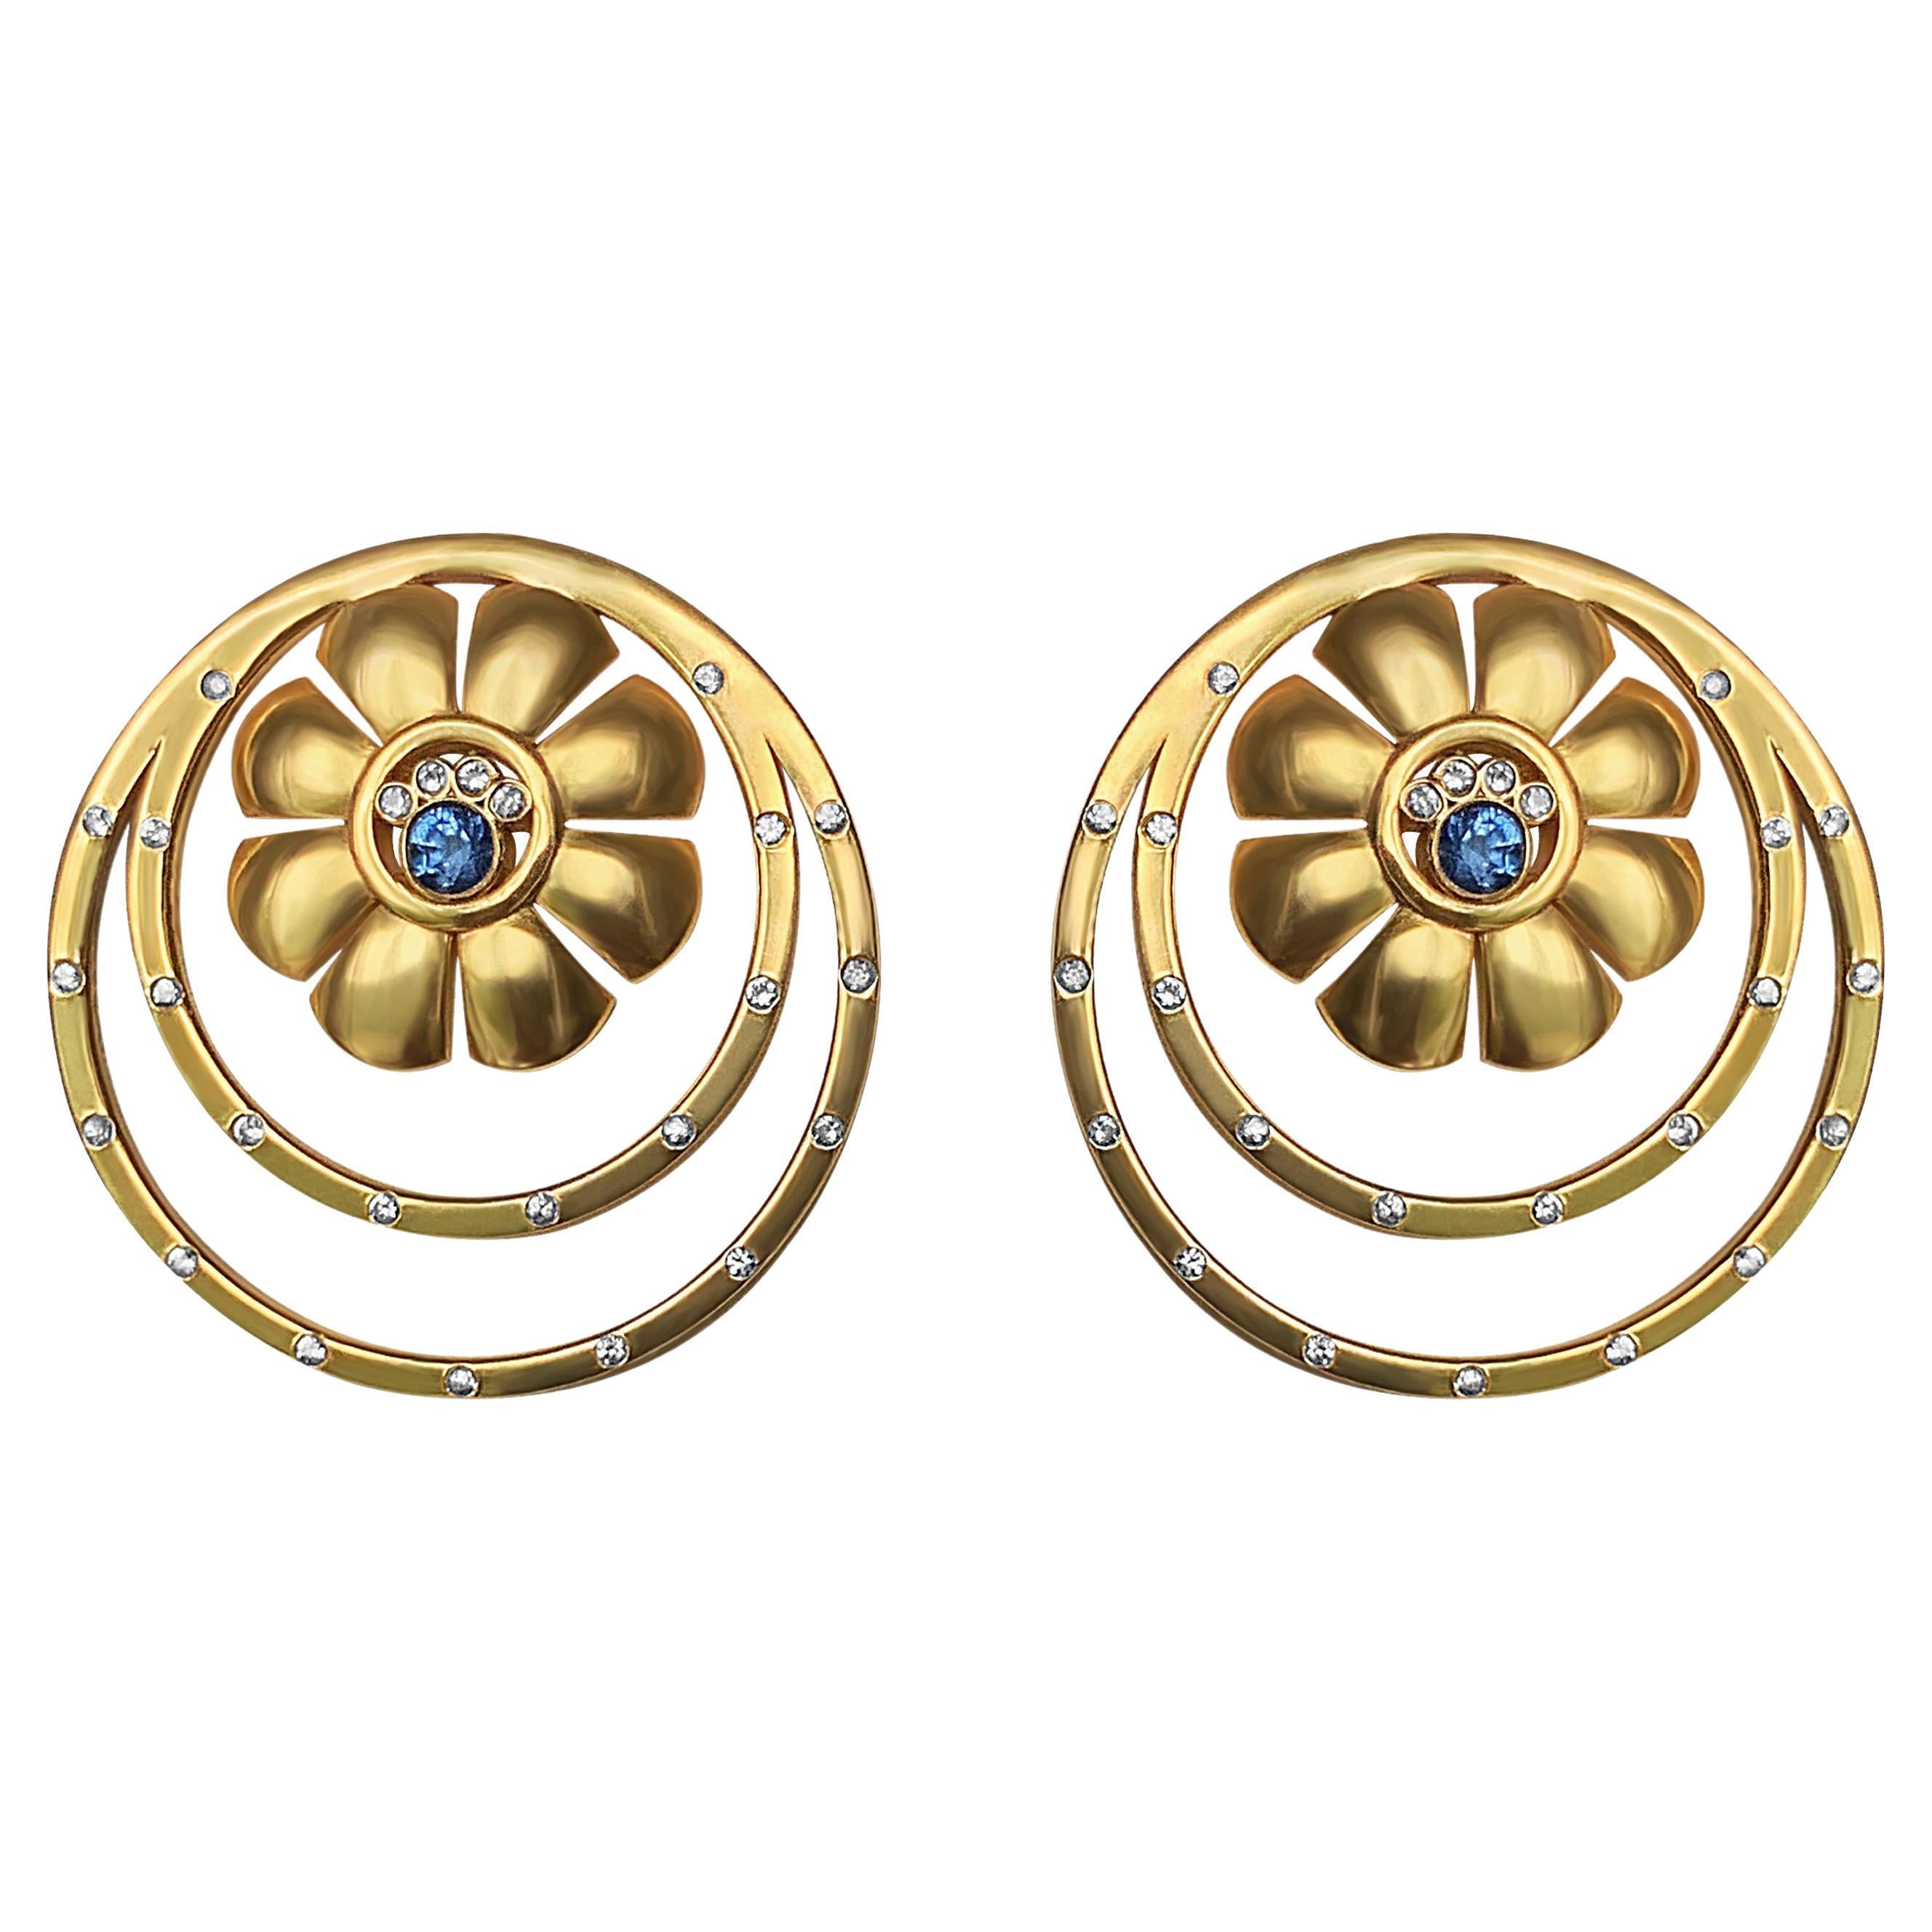 Ariadne Grecian Flower Stud Earrings with Diamonds and Sapphires